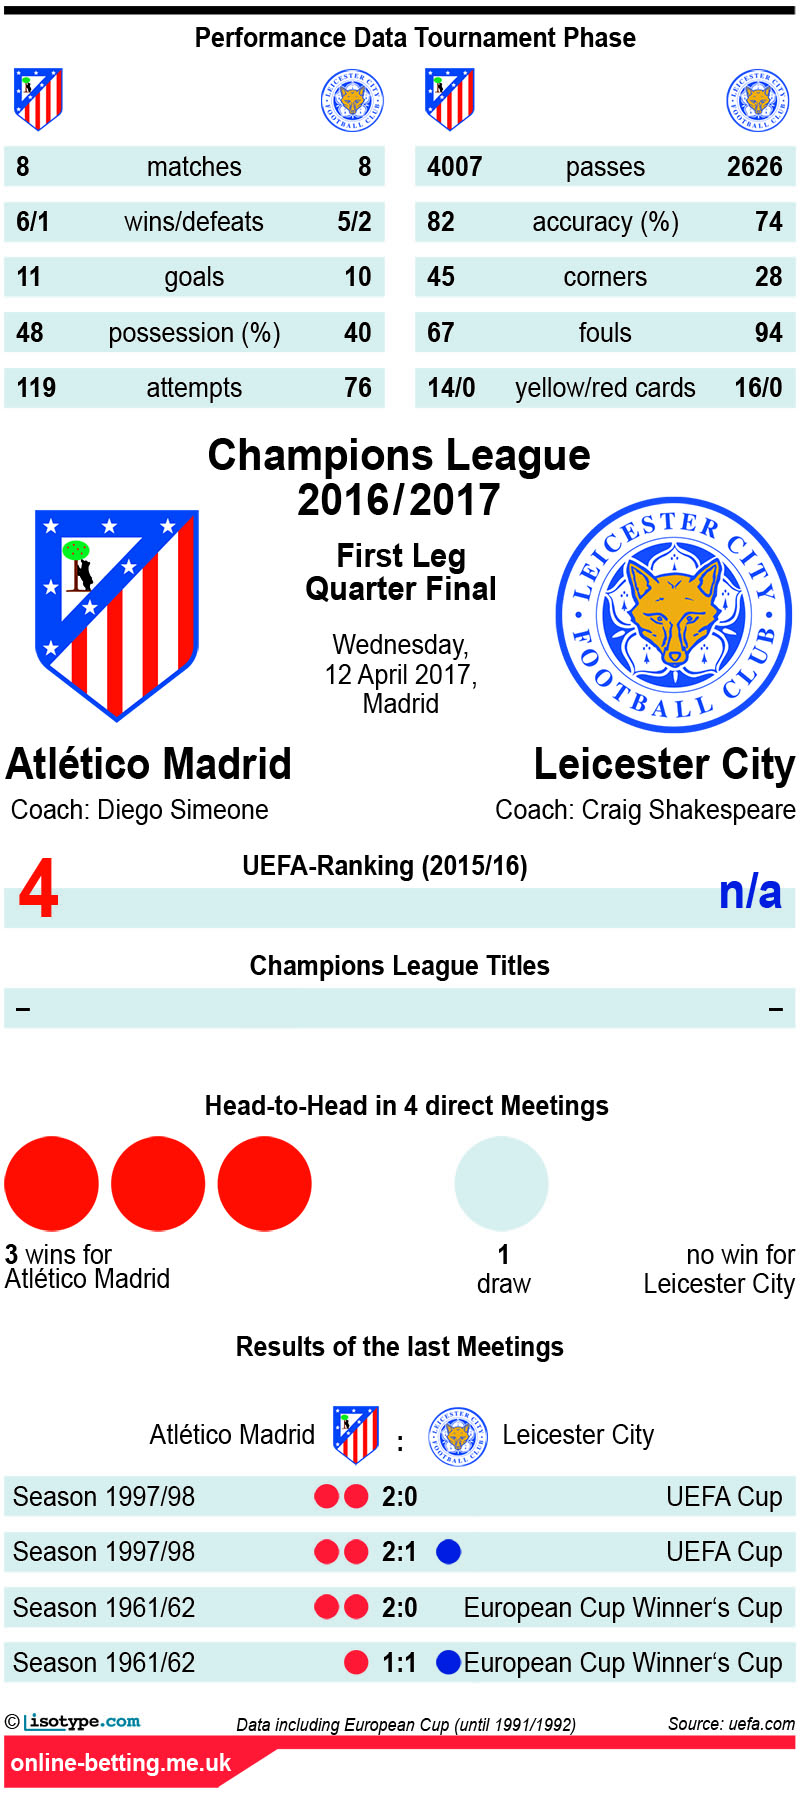 Atletico v Leicester 2017 Infographic